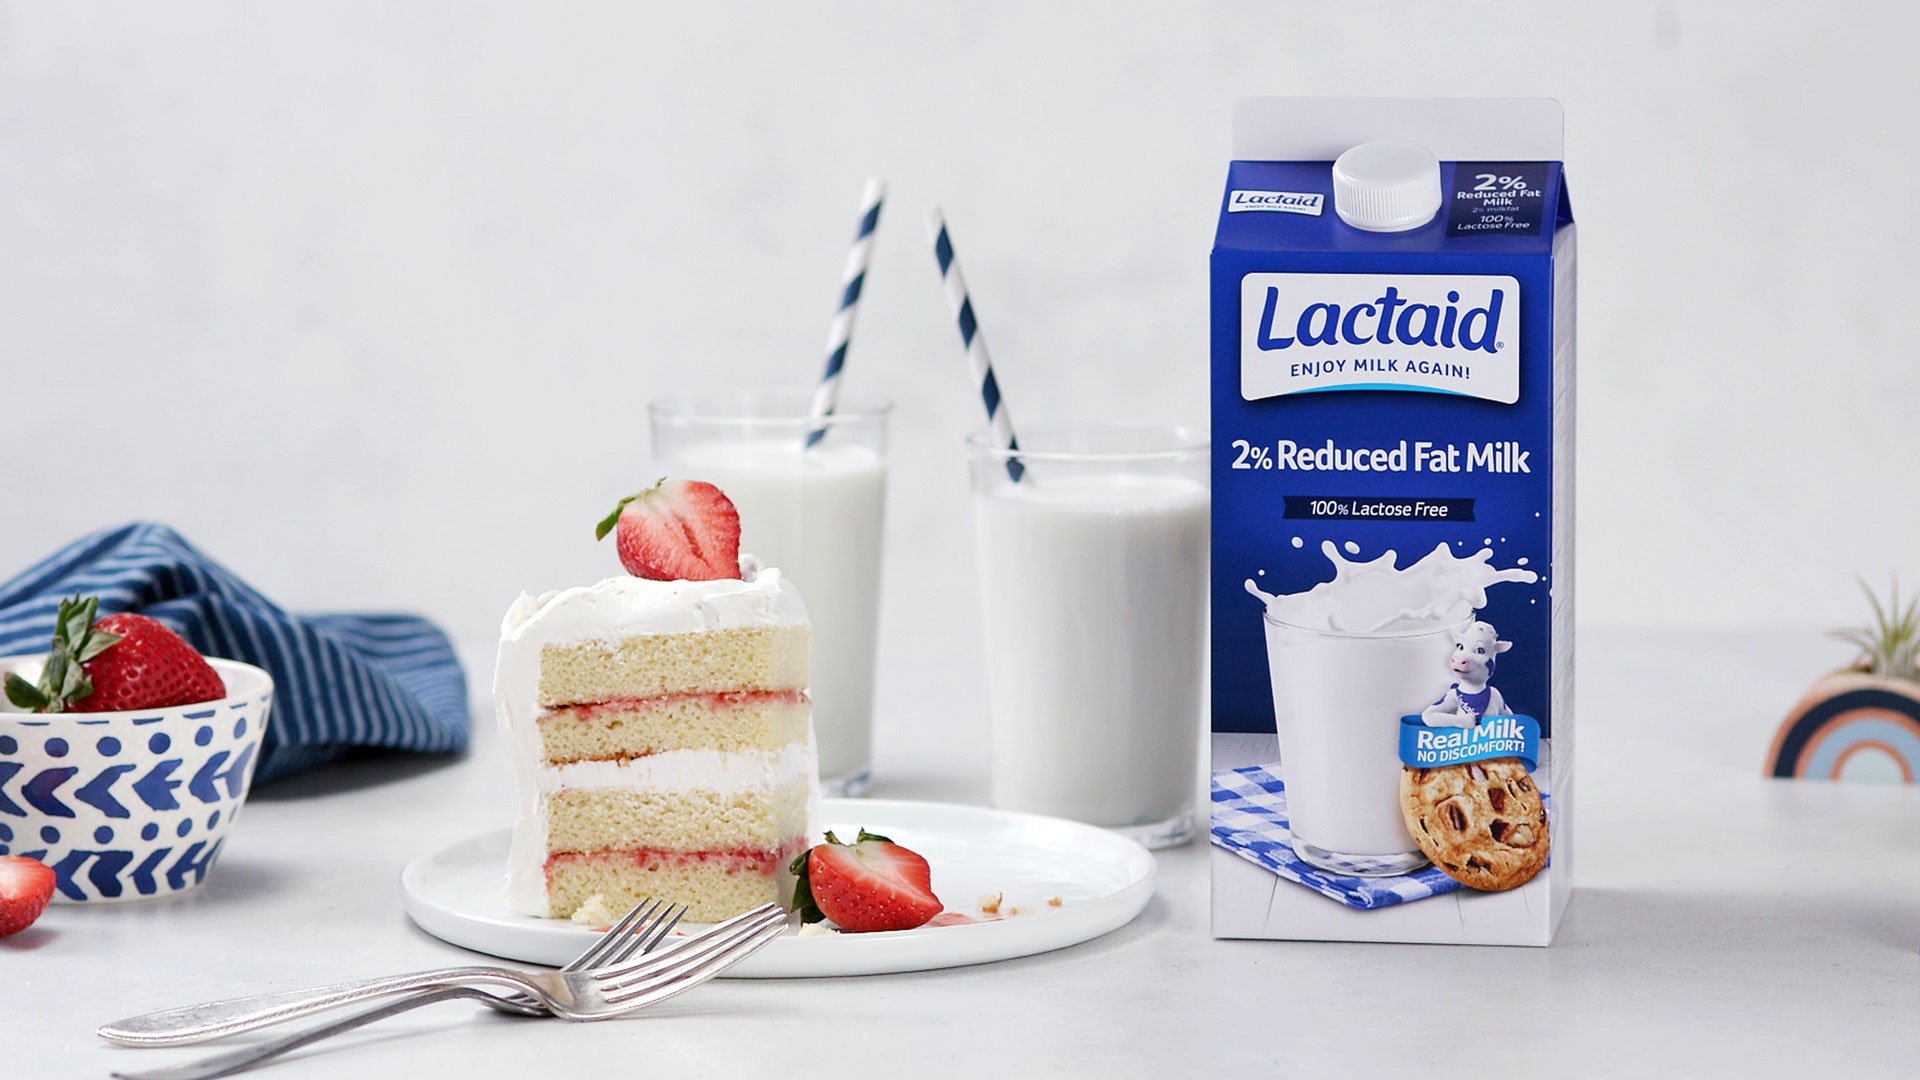 Strawberry Shortcake and Homemade Jam made with Lactaid®